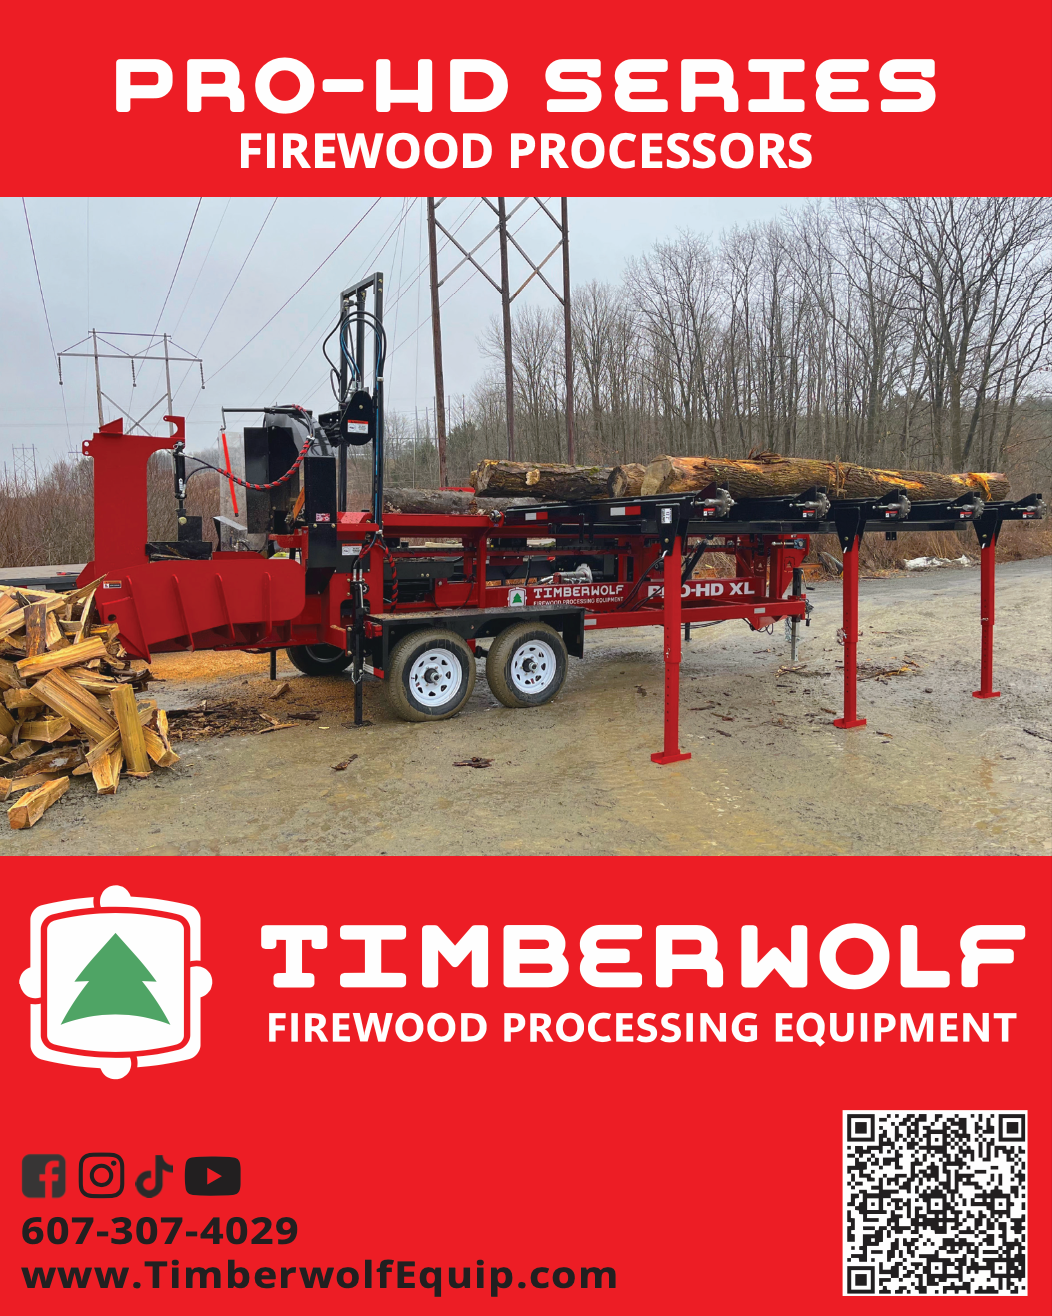 Timberwolf Firewood Processing Equipment Pro-HD Series Firewood Processors Technical Specifications Brochure